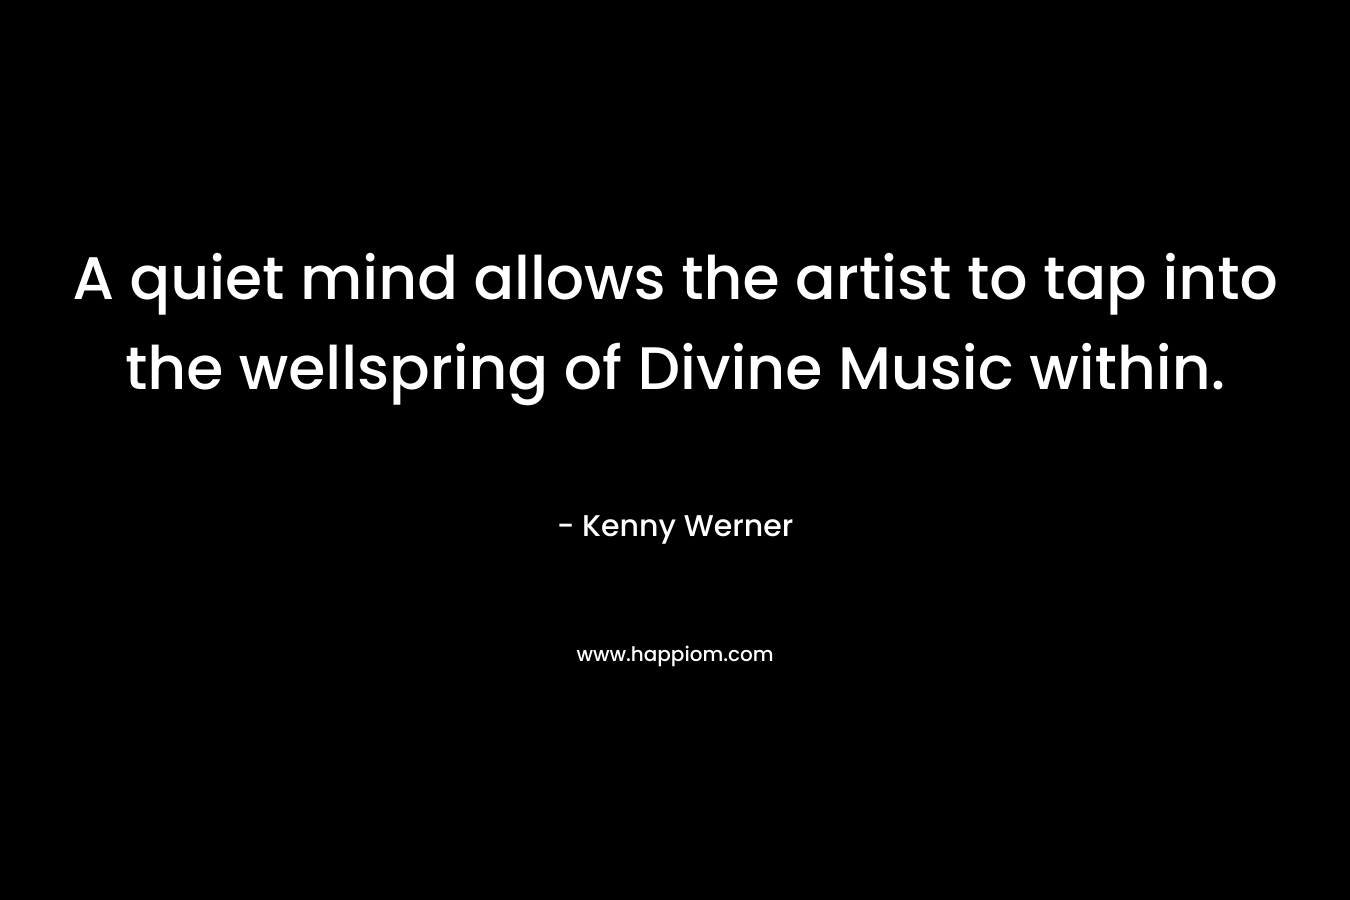 A quiet mind allows the artist to tap into the wellspring of Divine Music within. – Kenny Werner